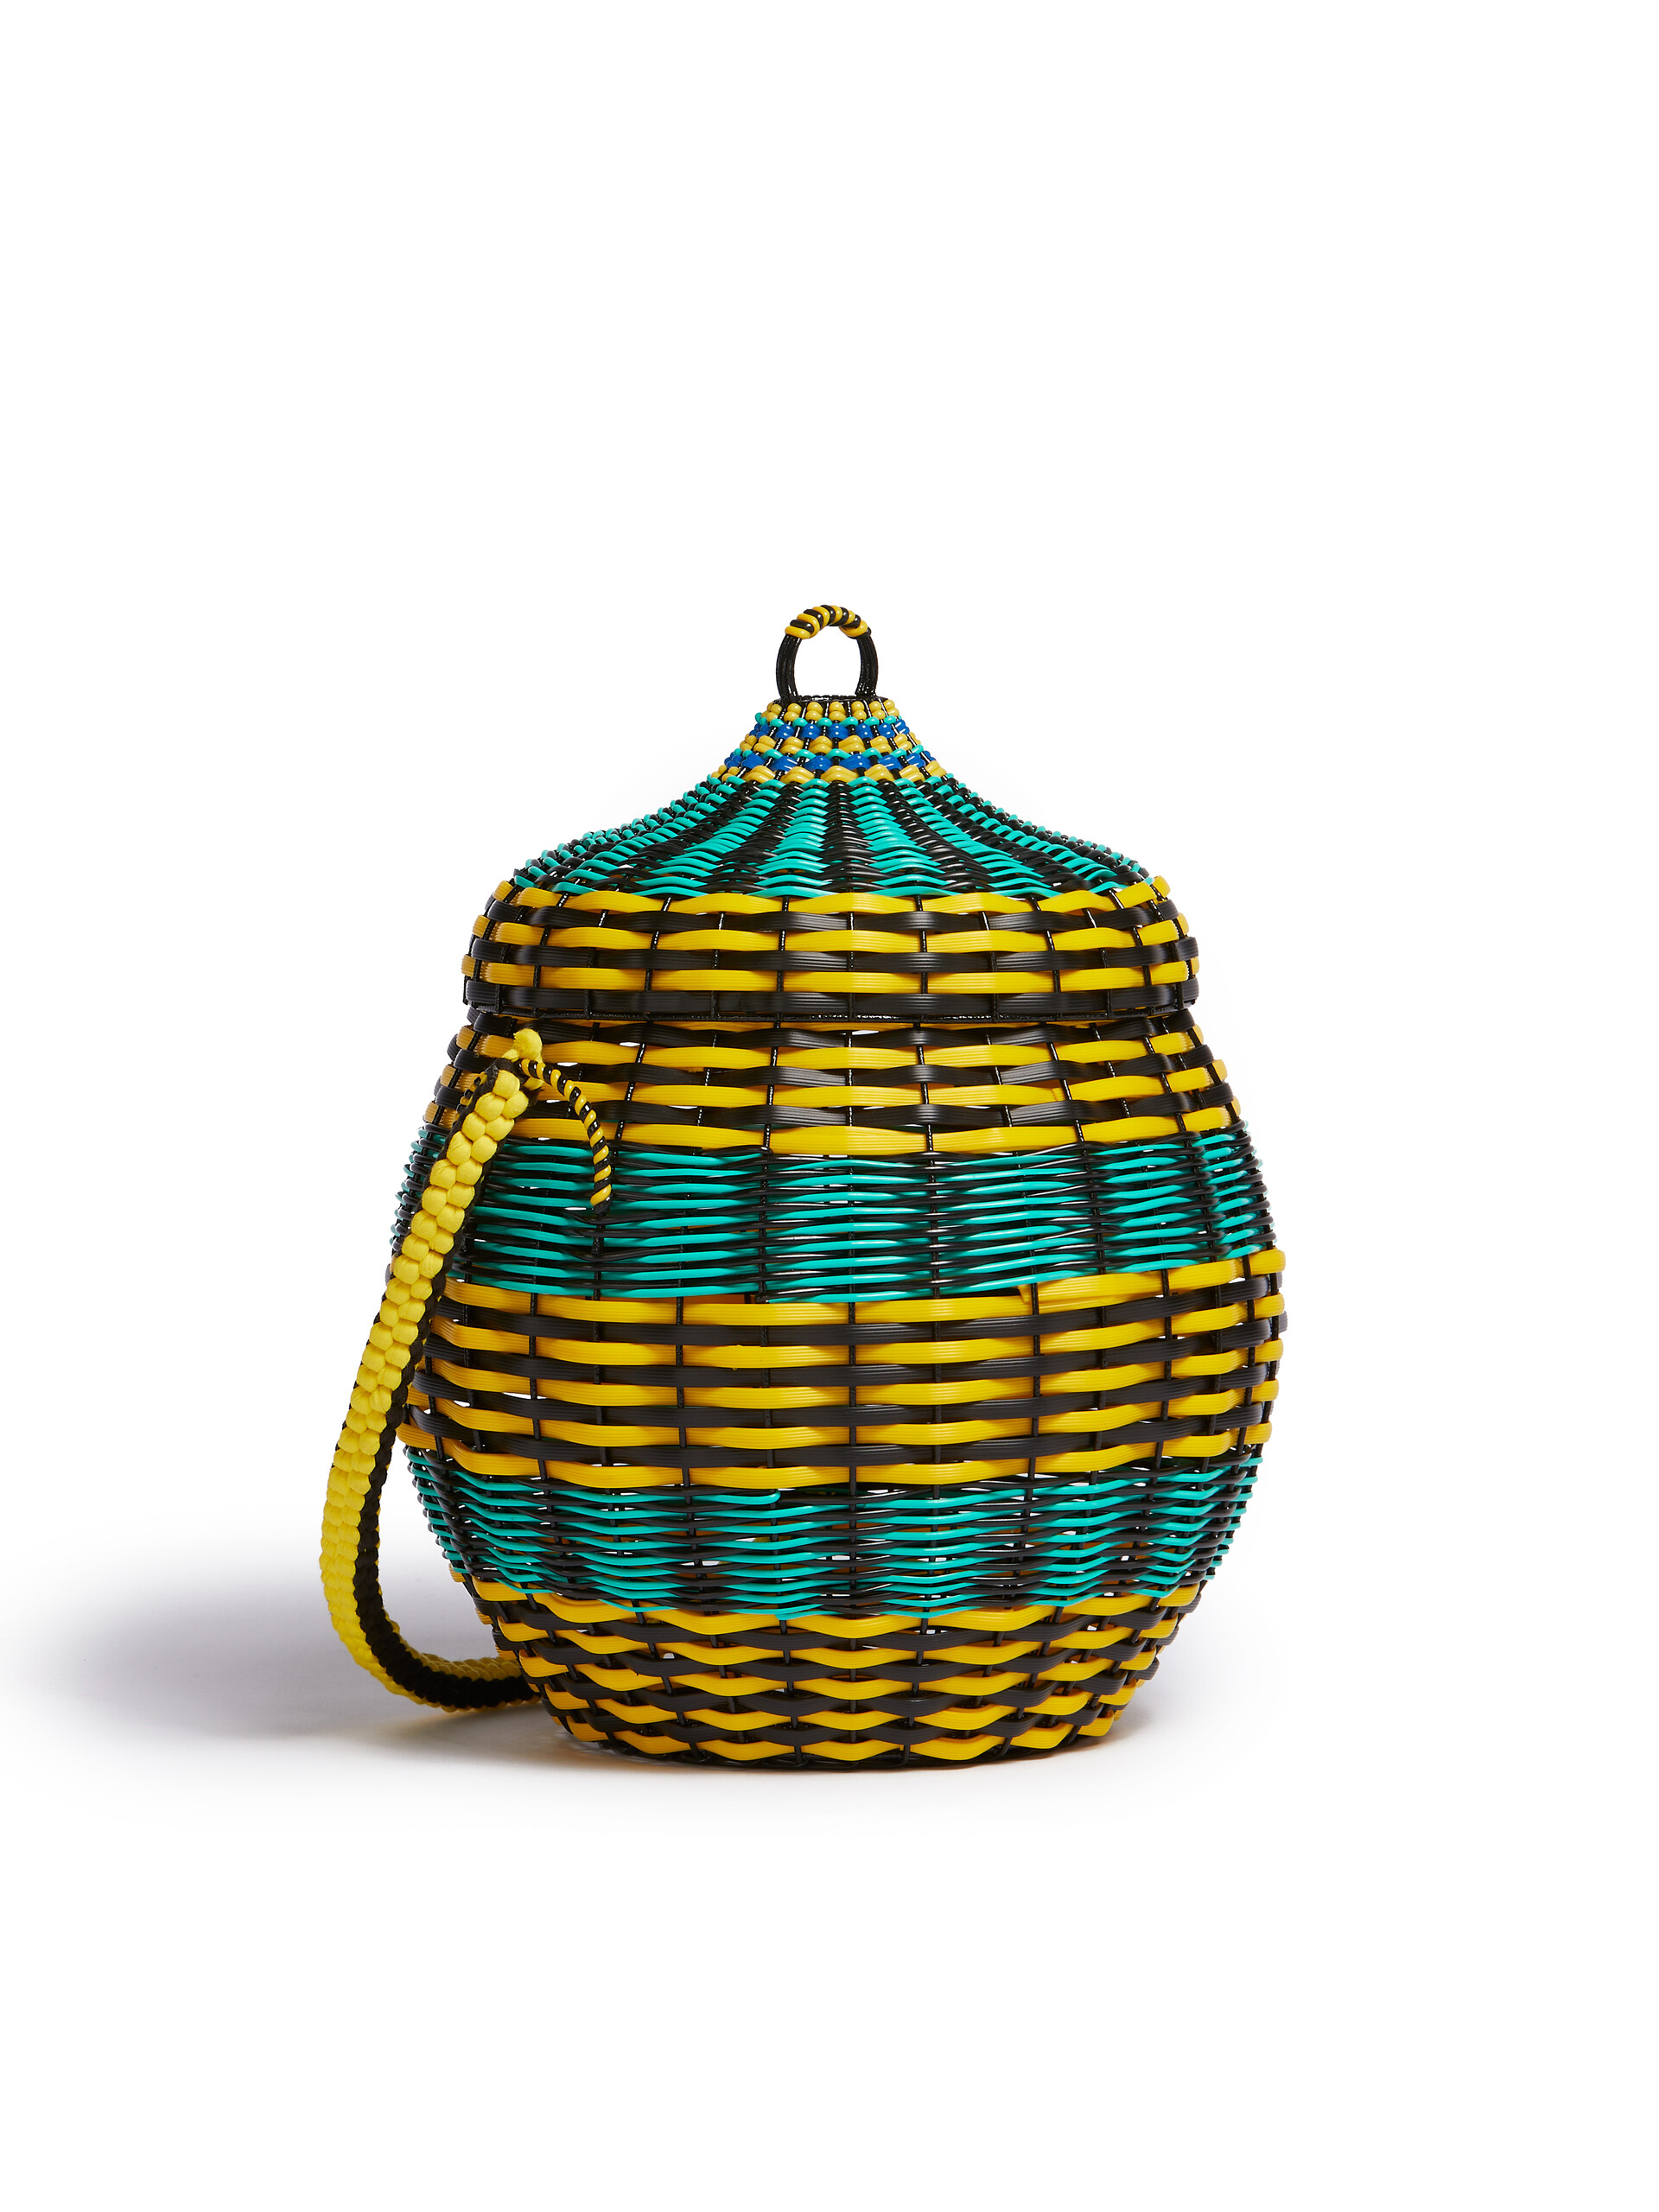 Yellow and green MARNI MARKET woven cable basket - Accessories - Image 2